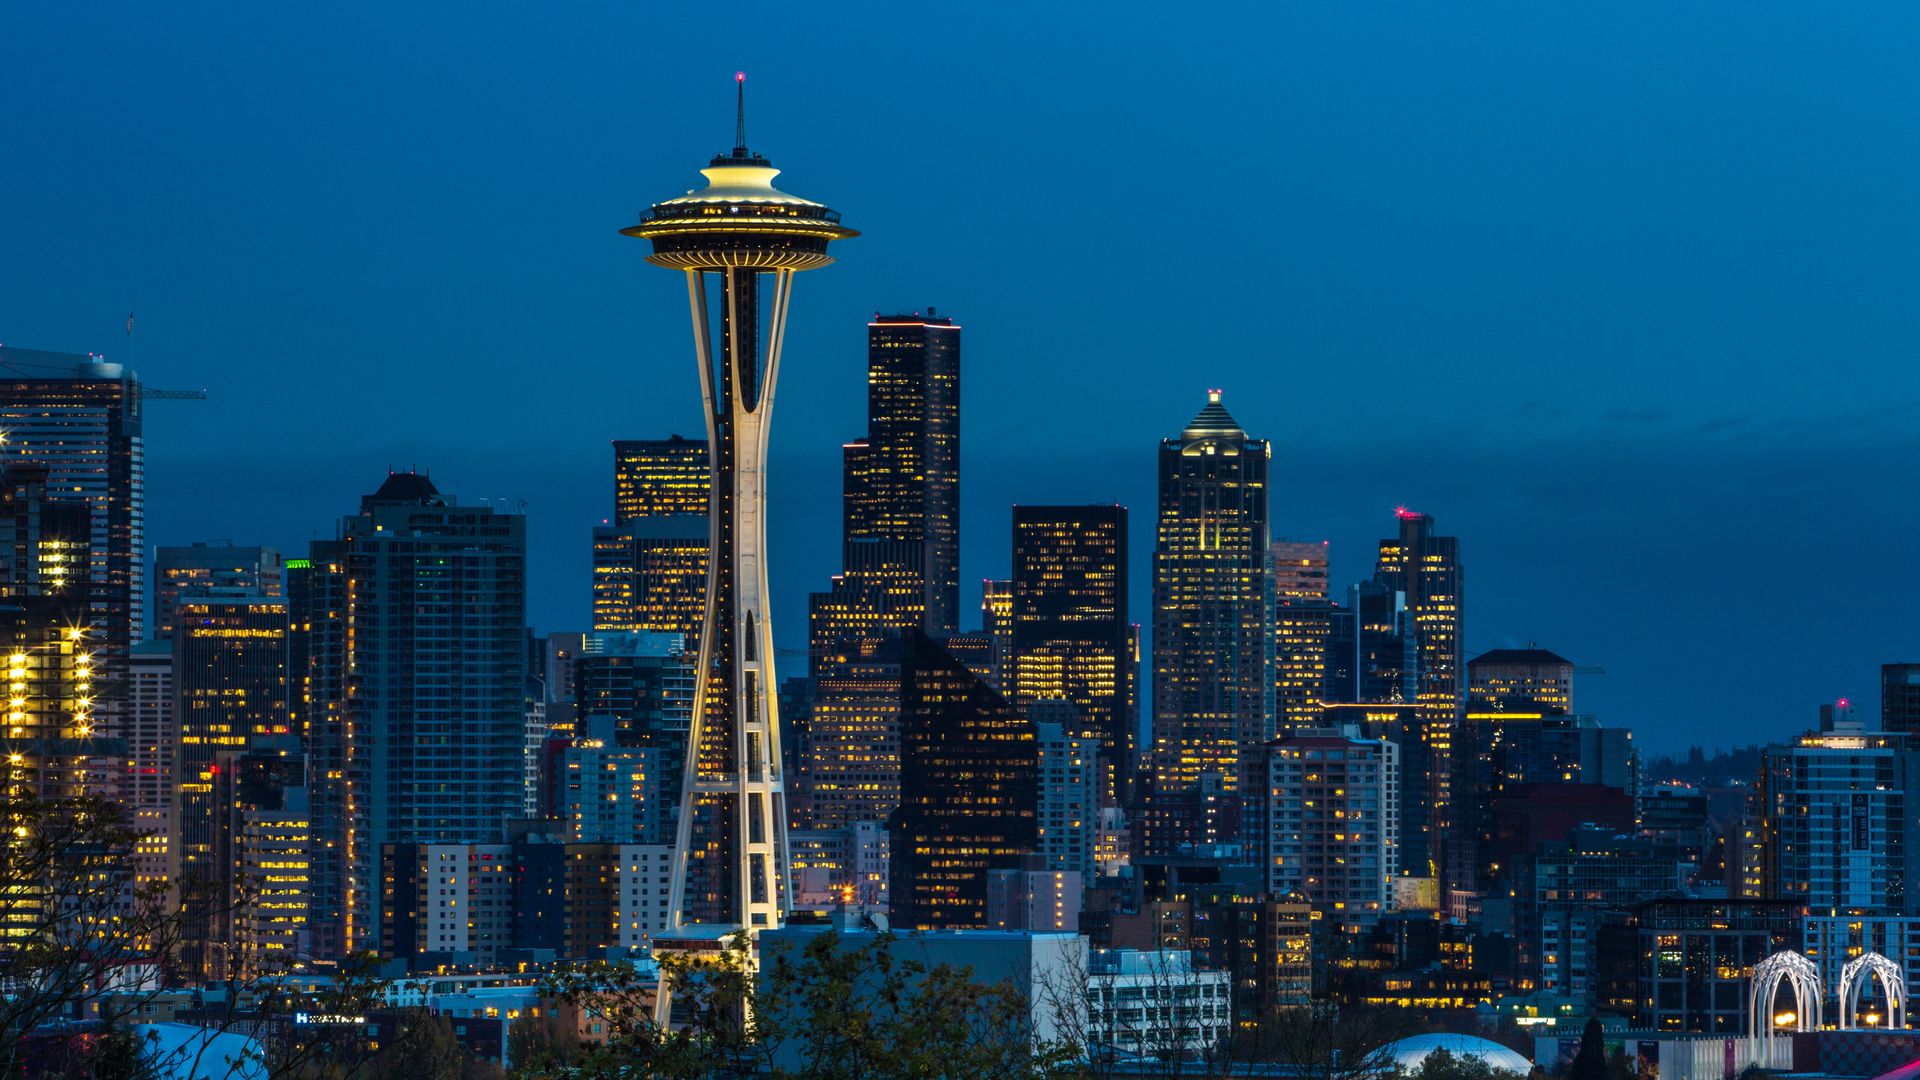 The Seattle skyline with the Space Needle at center, shown with a blue sky turning dark.